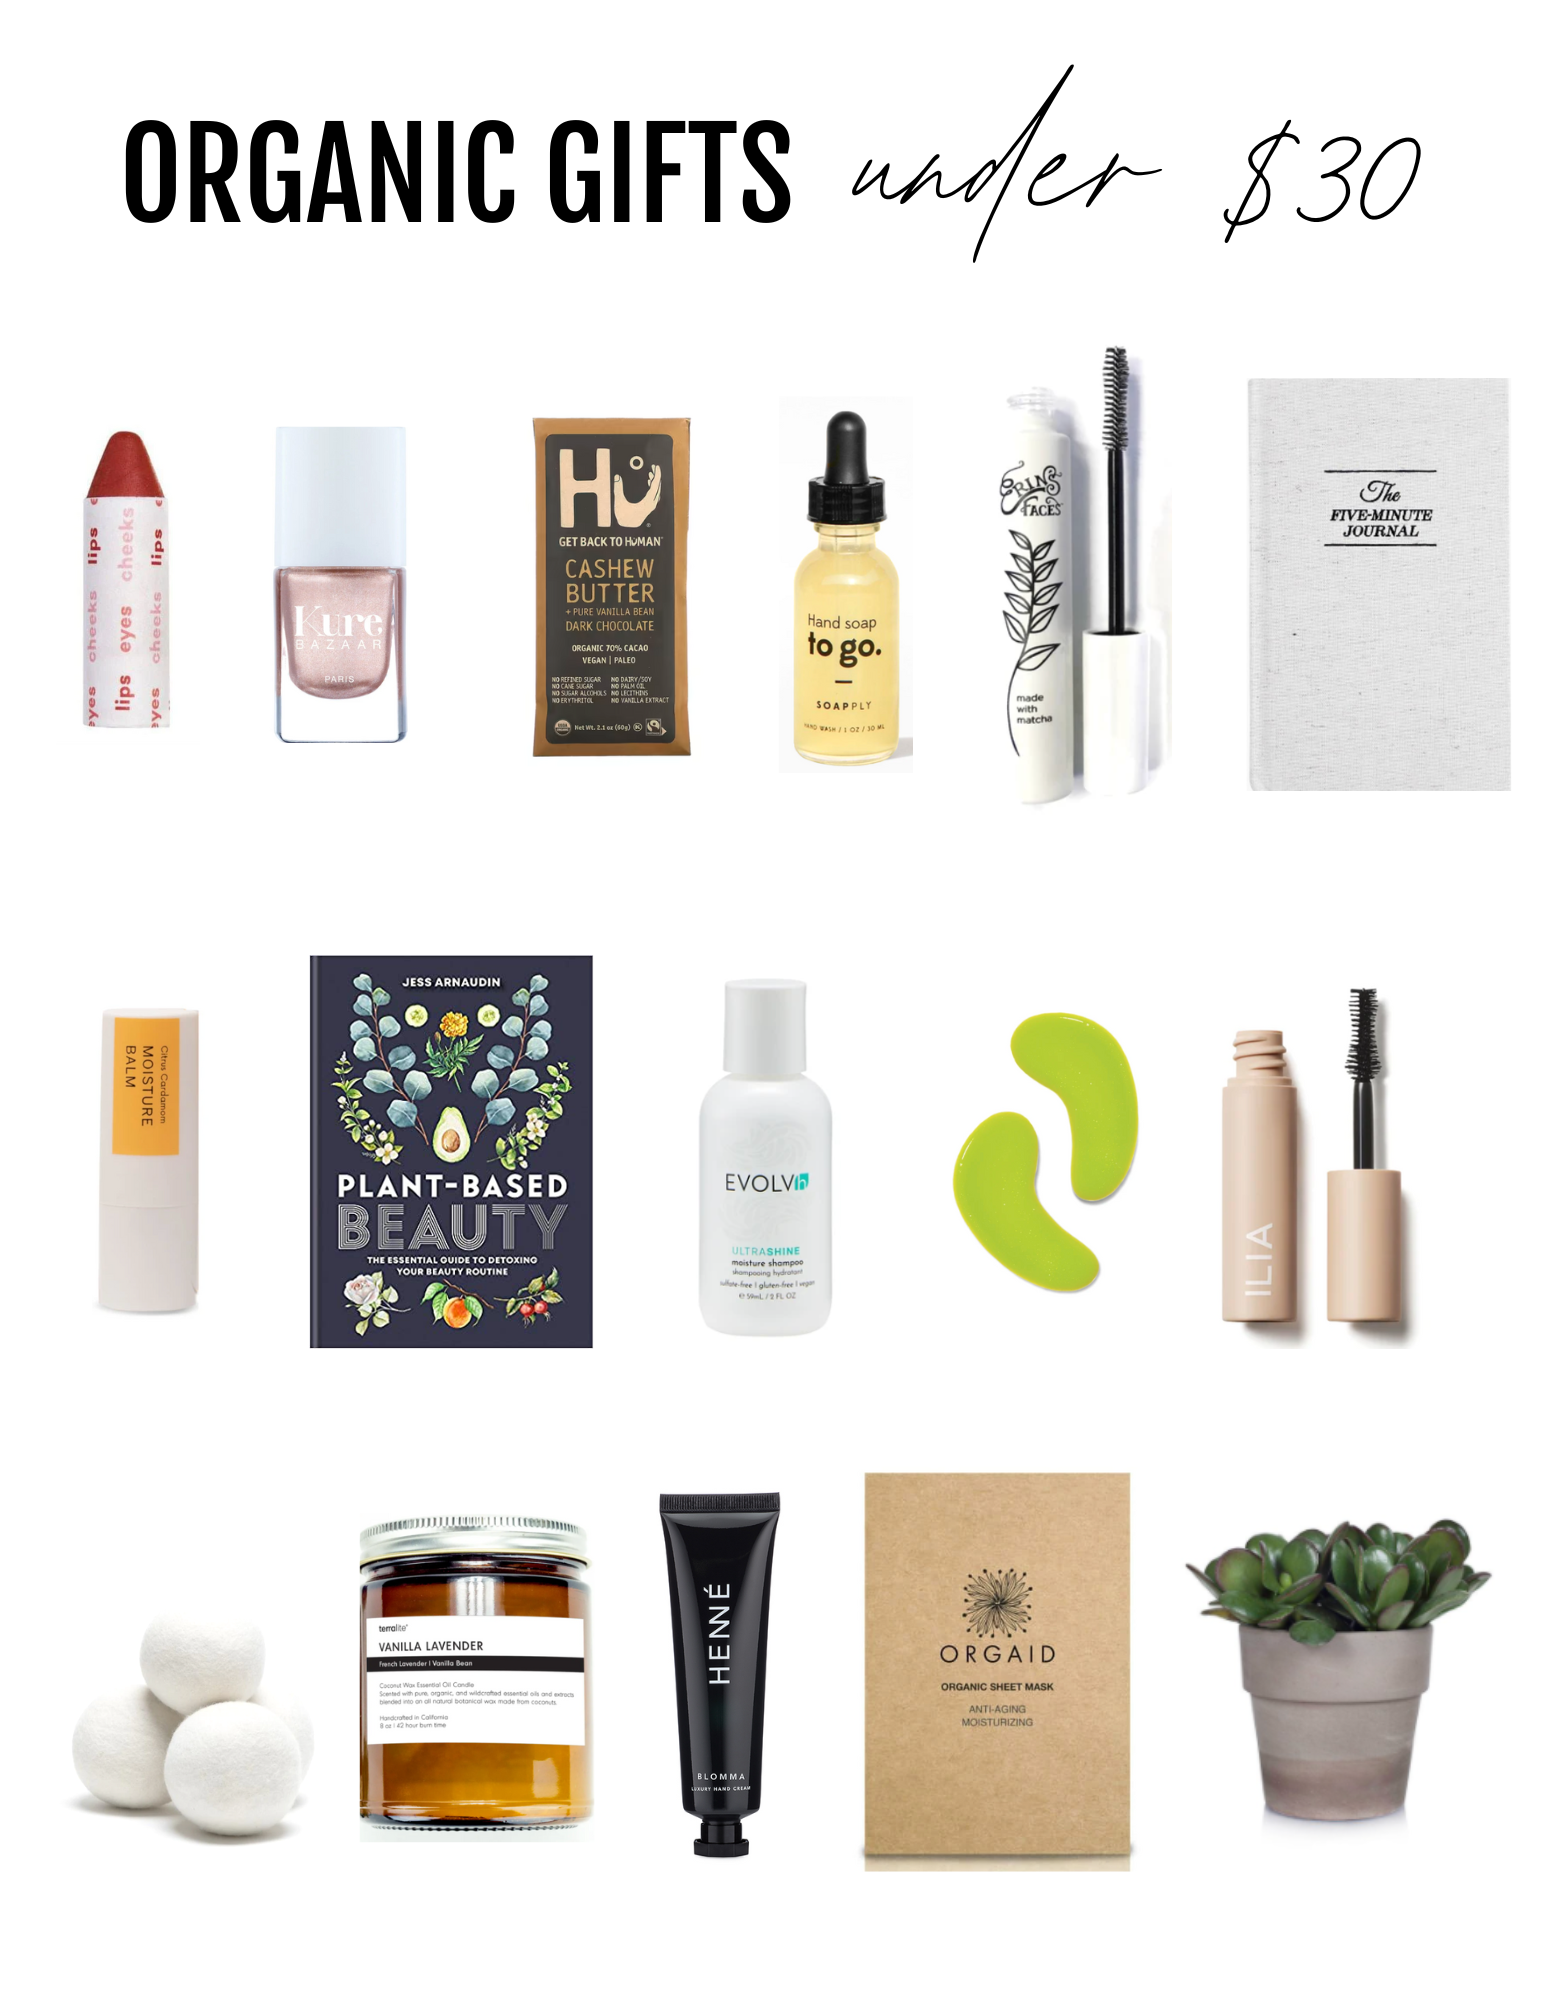 Organic Gift Guide: 20 under $30! The New Knew The New Knew